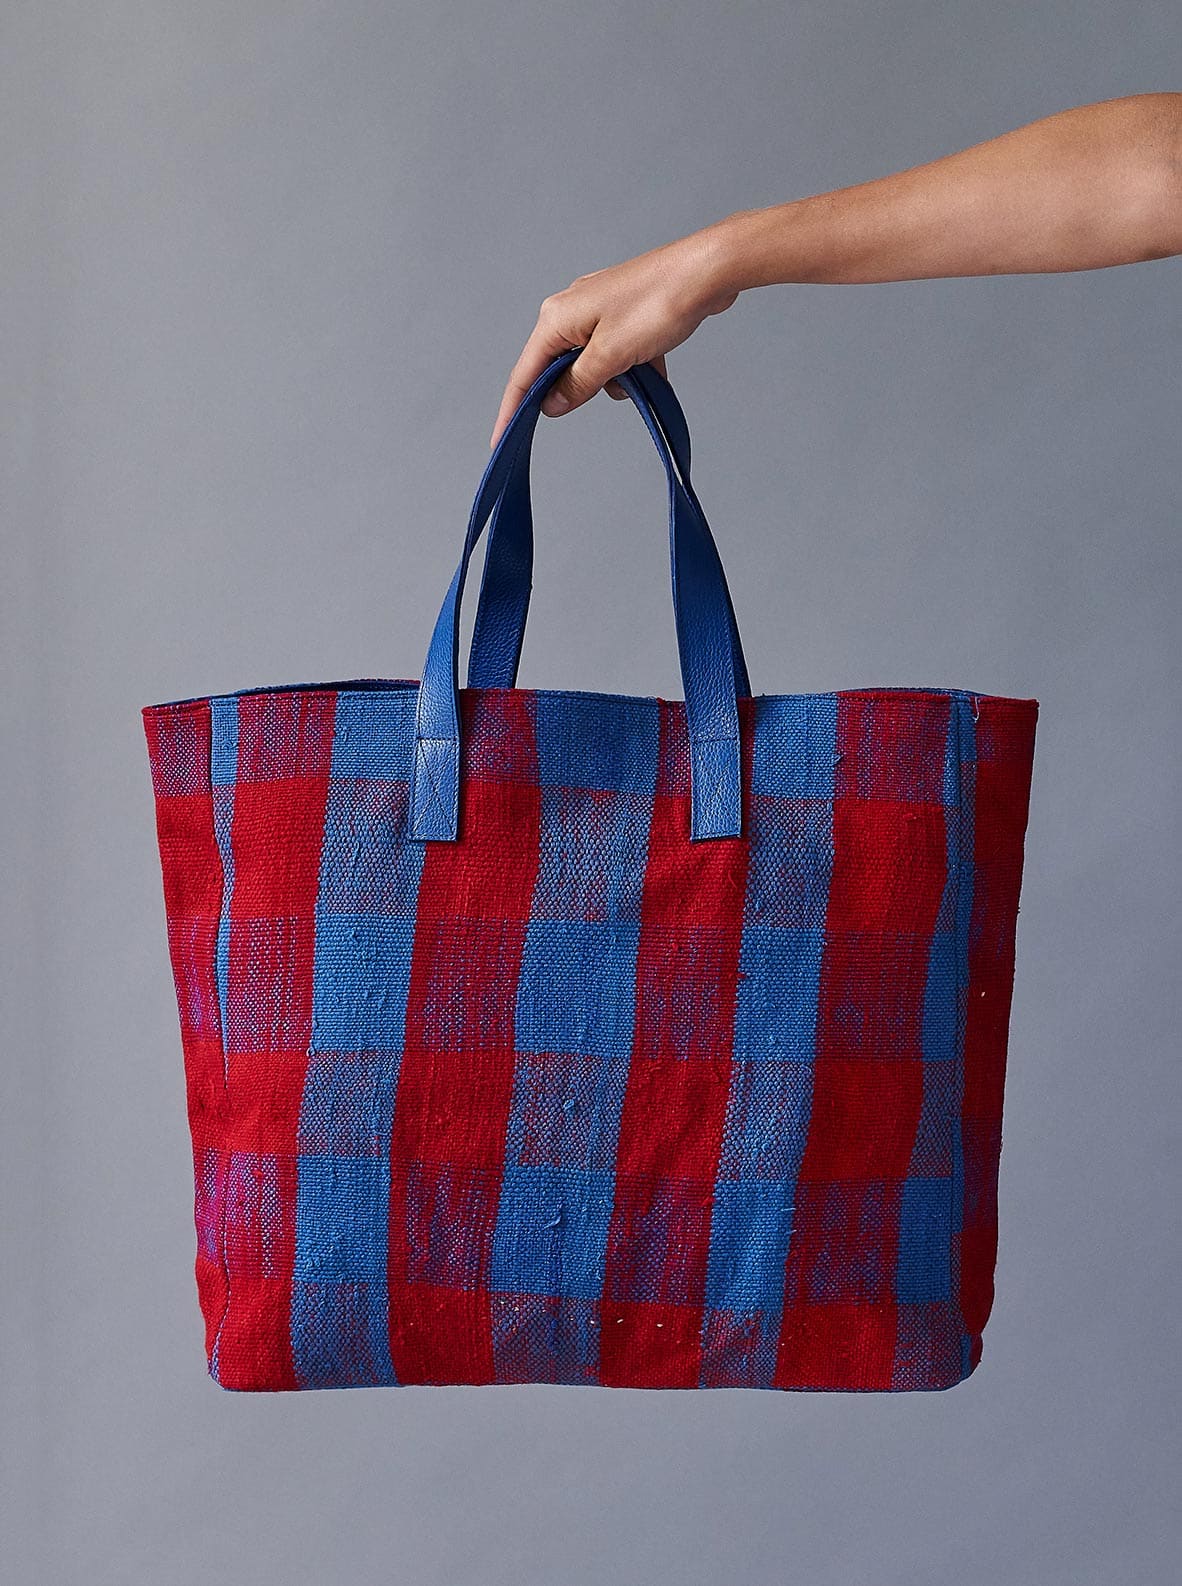 Vintage grain sack tote bag. Vertical blue and red stripes. Handwoven –  Bits and Totes